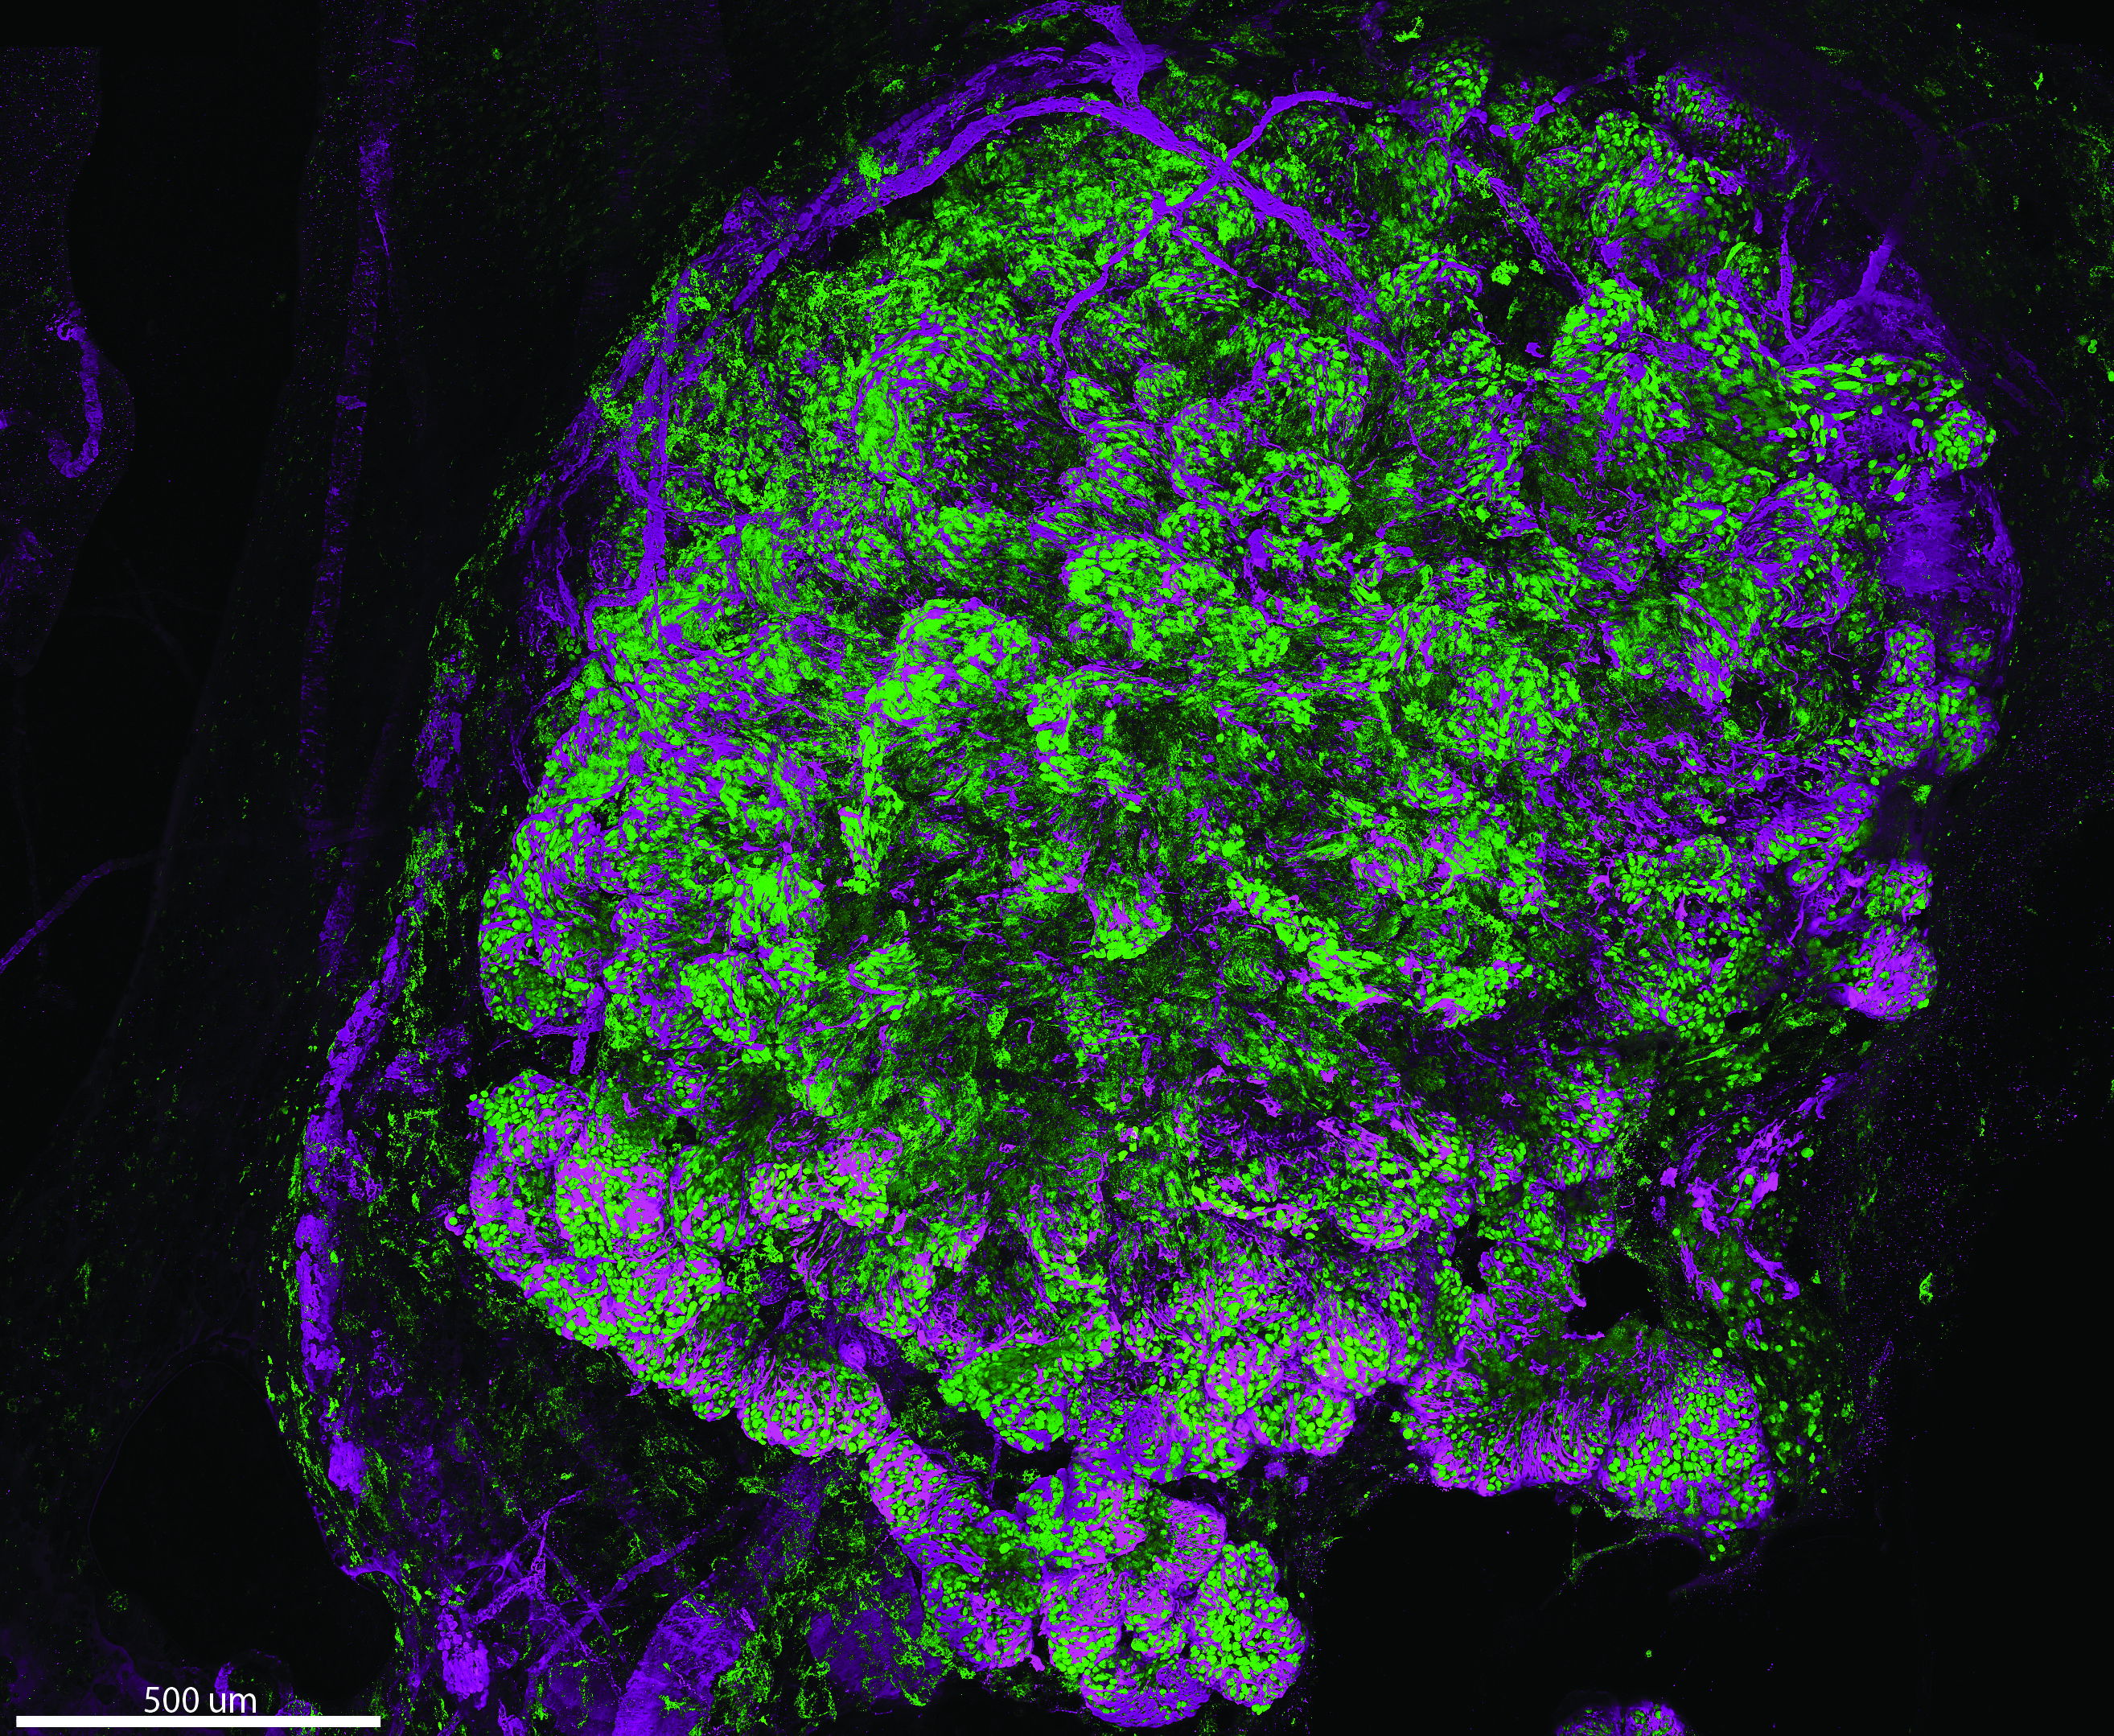 Expansive growth of DCIS cells (green) in murine breast epithelium (purple)